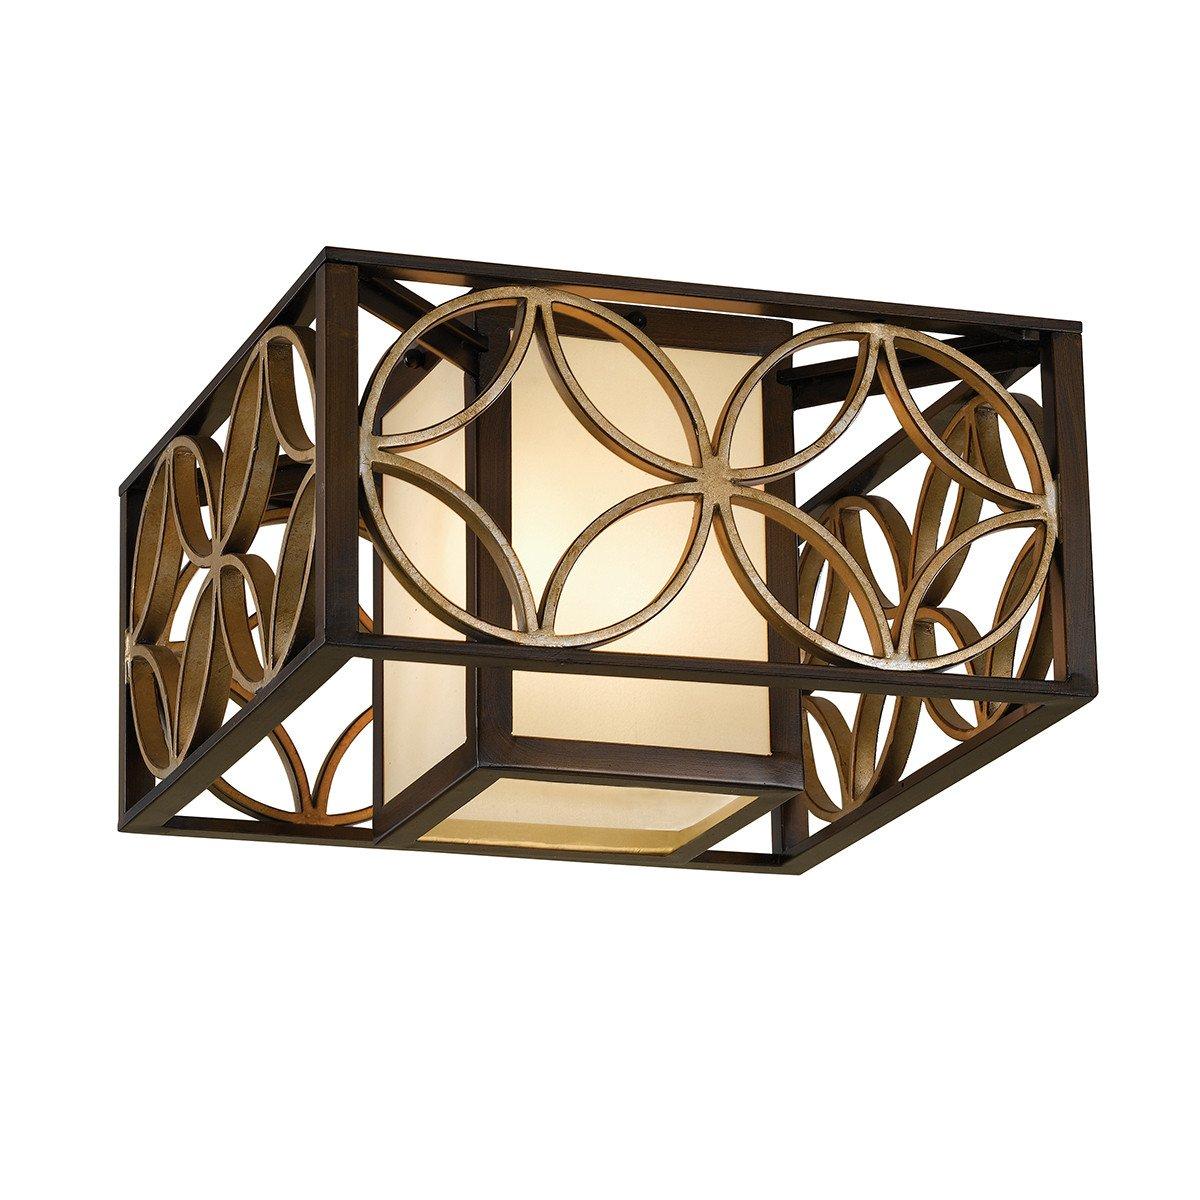 Feiss Remy Flush Mount Light in Bronze and Gold